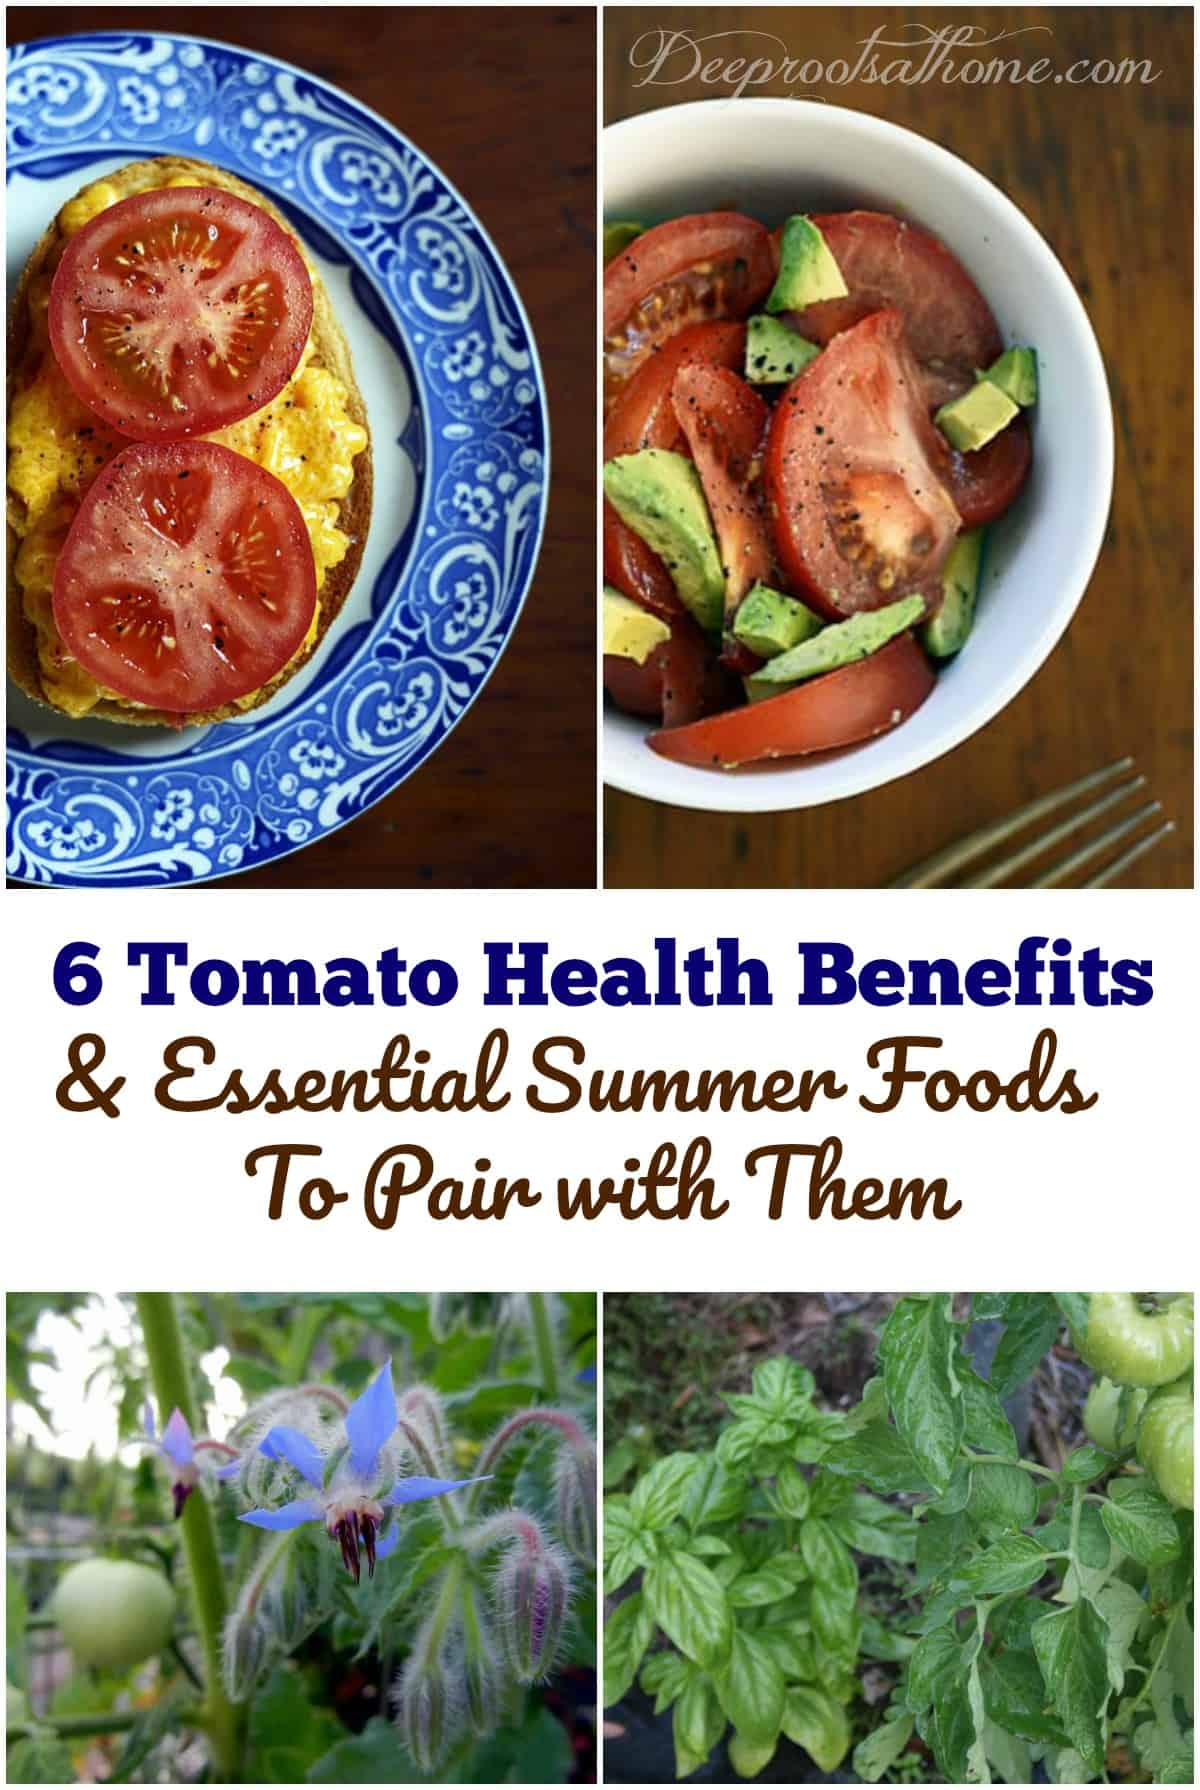 6 Tomato Health Benefits & Essential Summer Foods To Pair with Them. 2 recipes with tomatoes. Pinterest image.